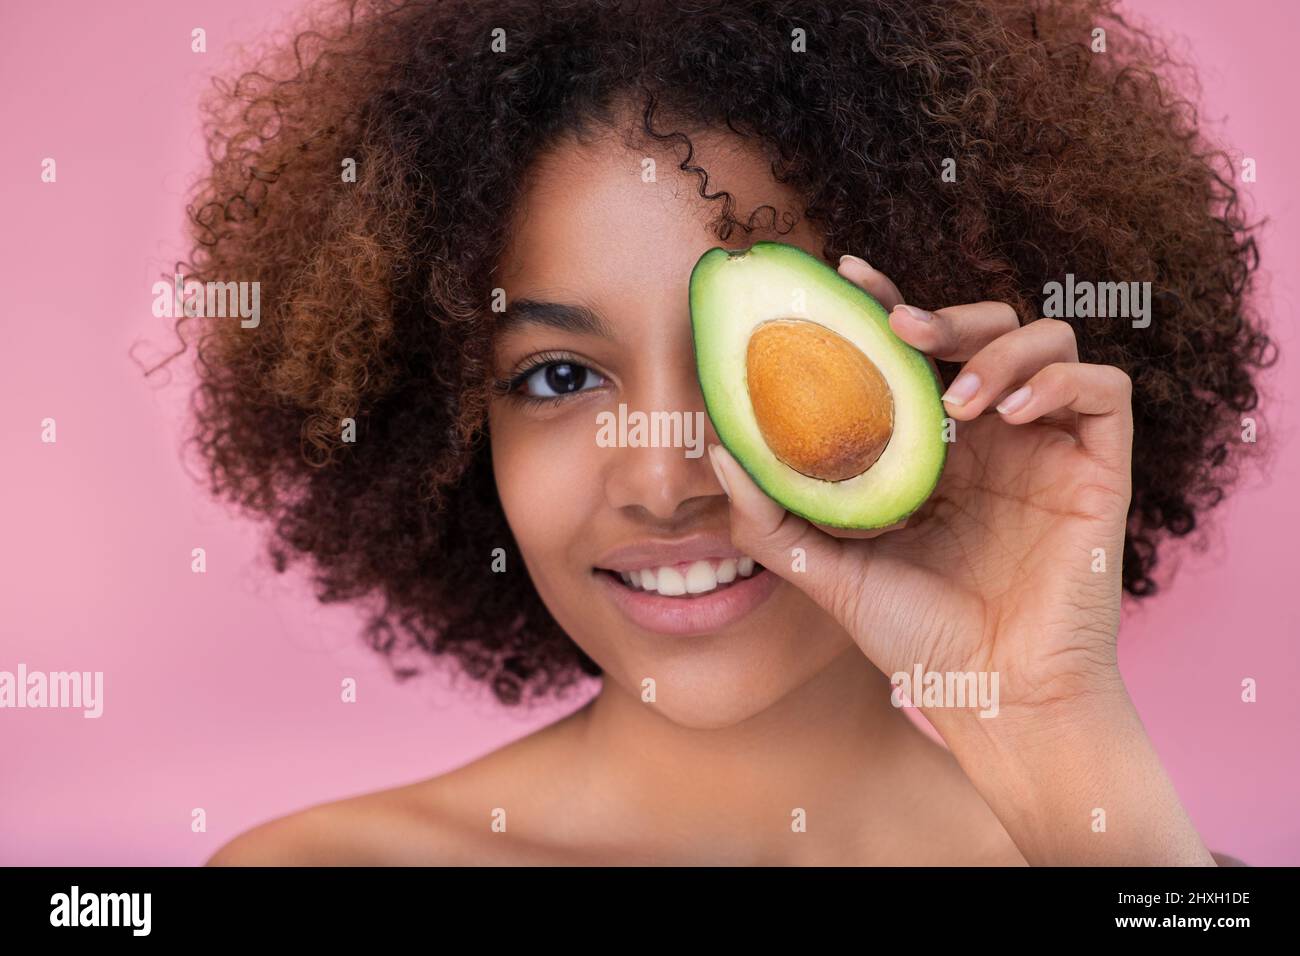 Portrait of a beautiful young dark skinned woman with curly hair covers one eye with half an avocado looks at the camera and smiles on a pink background. Stock Photo